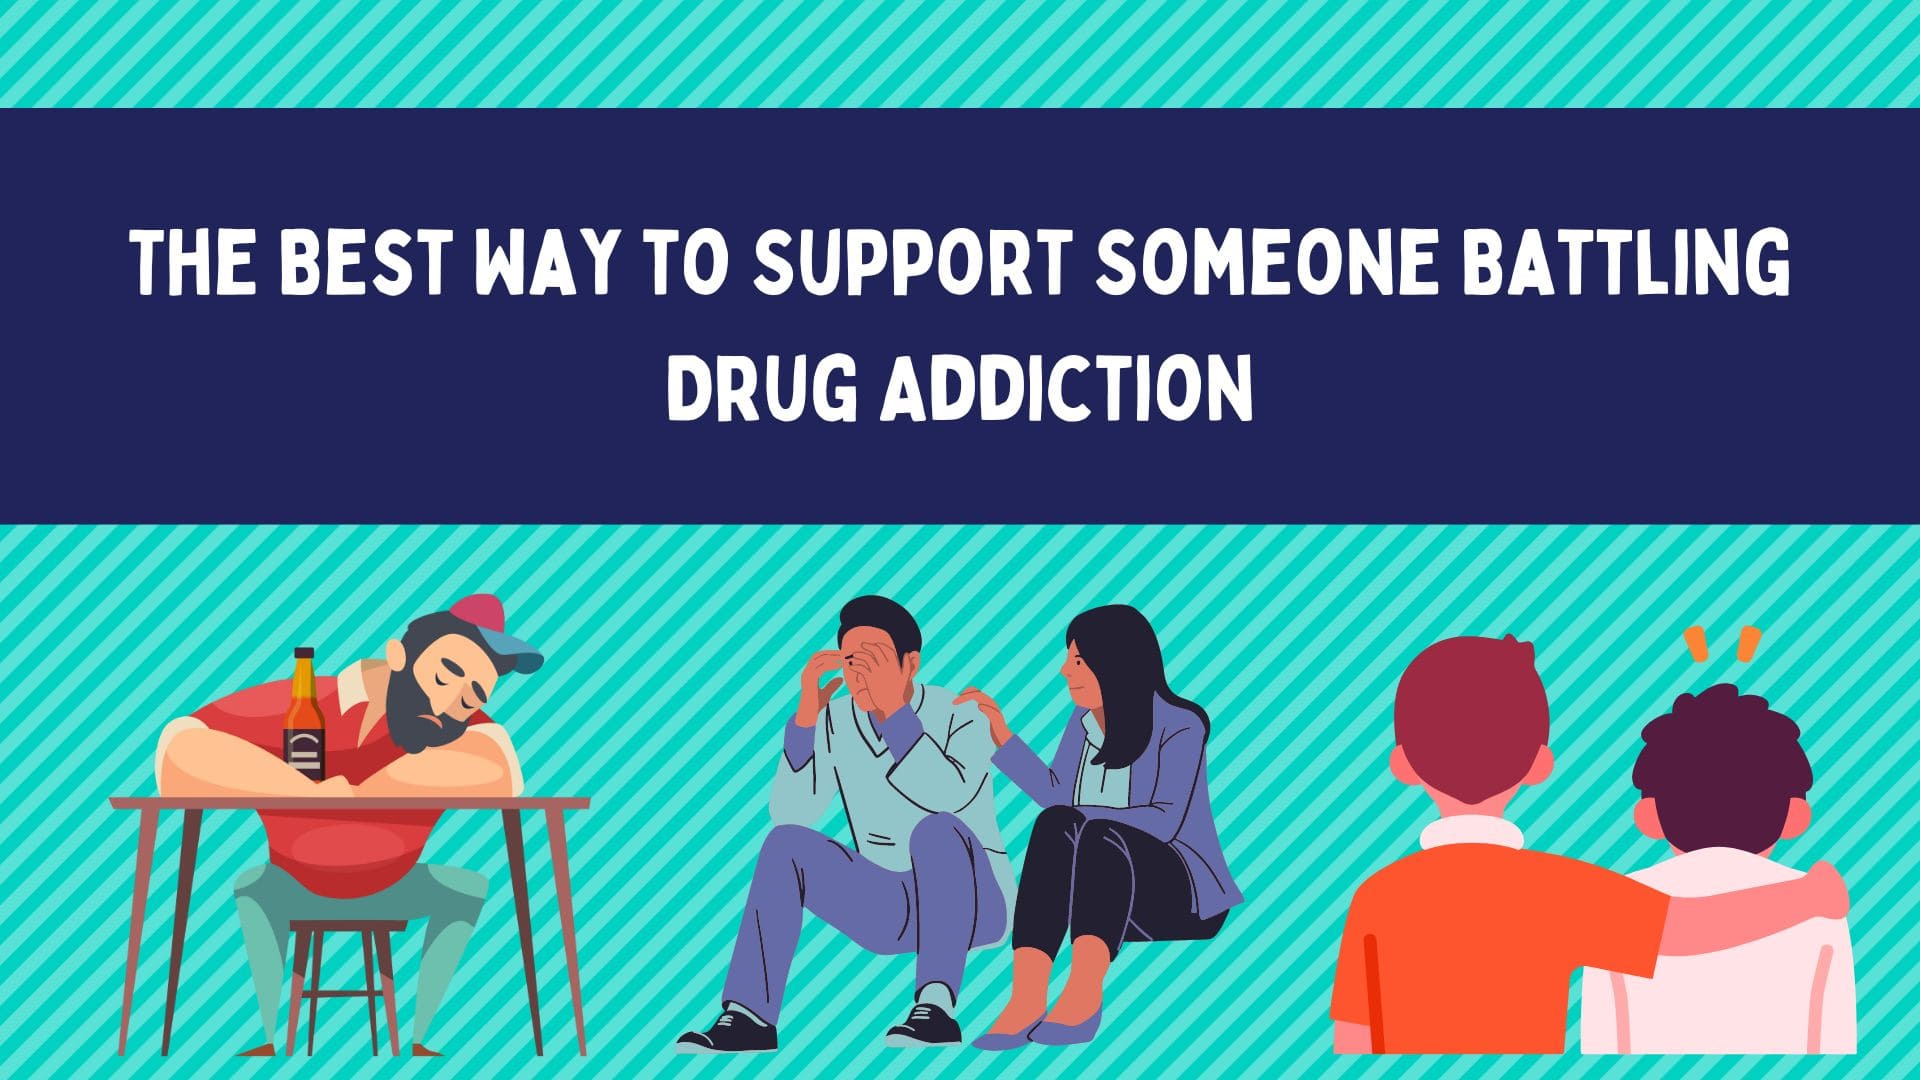 The Best Way to Support Someone Battling Drug Addiction